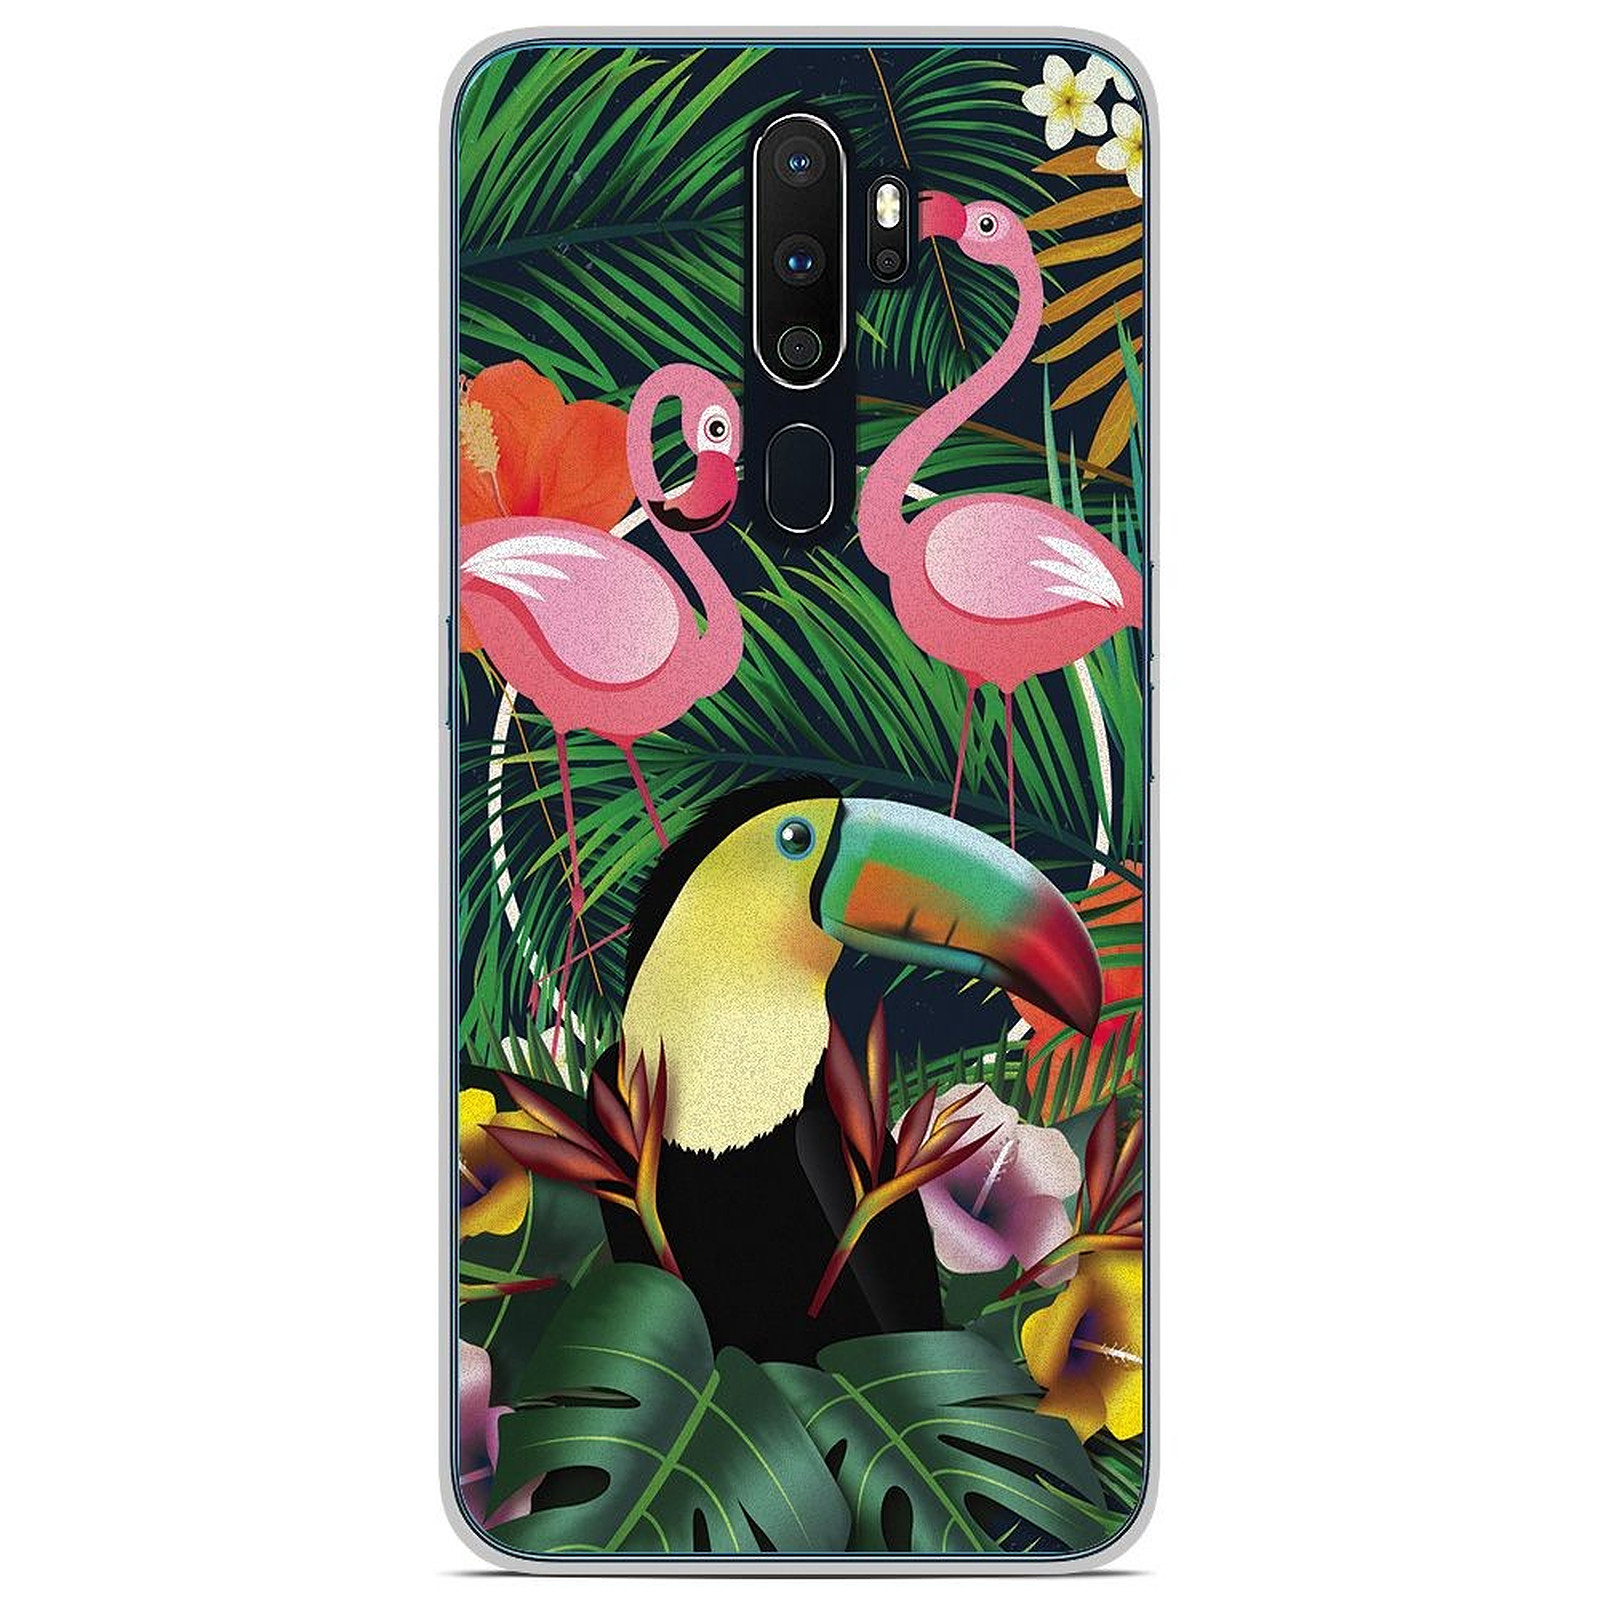 1001 Coques Coque silicone gel Oppo A9 2020 motif Tropical Toucan - Coque telephone 1001Coques